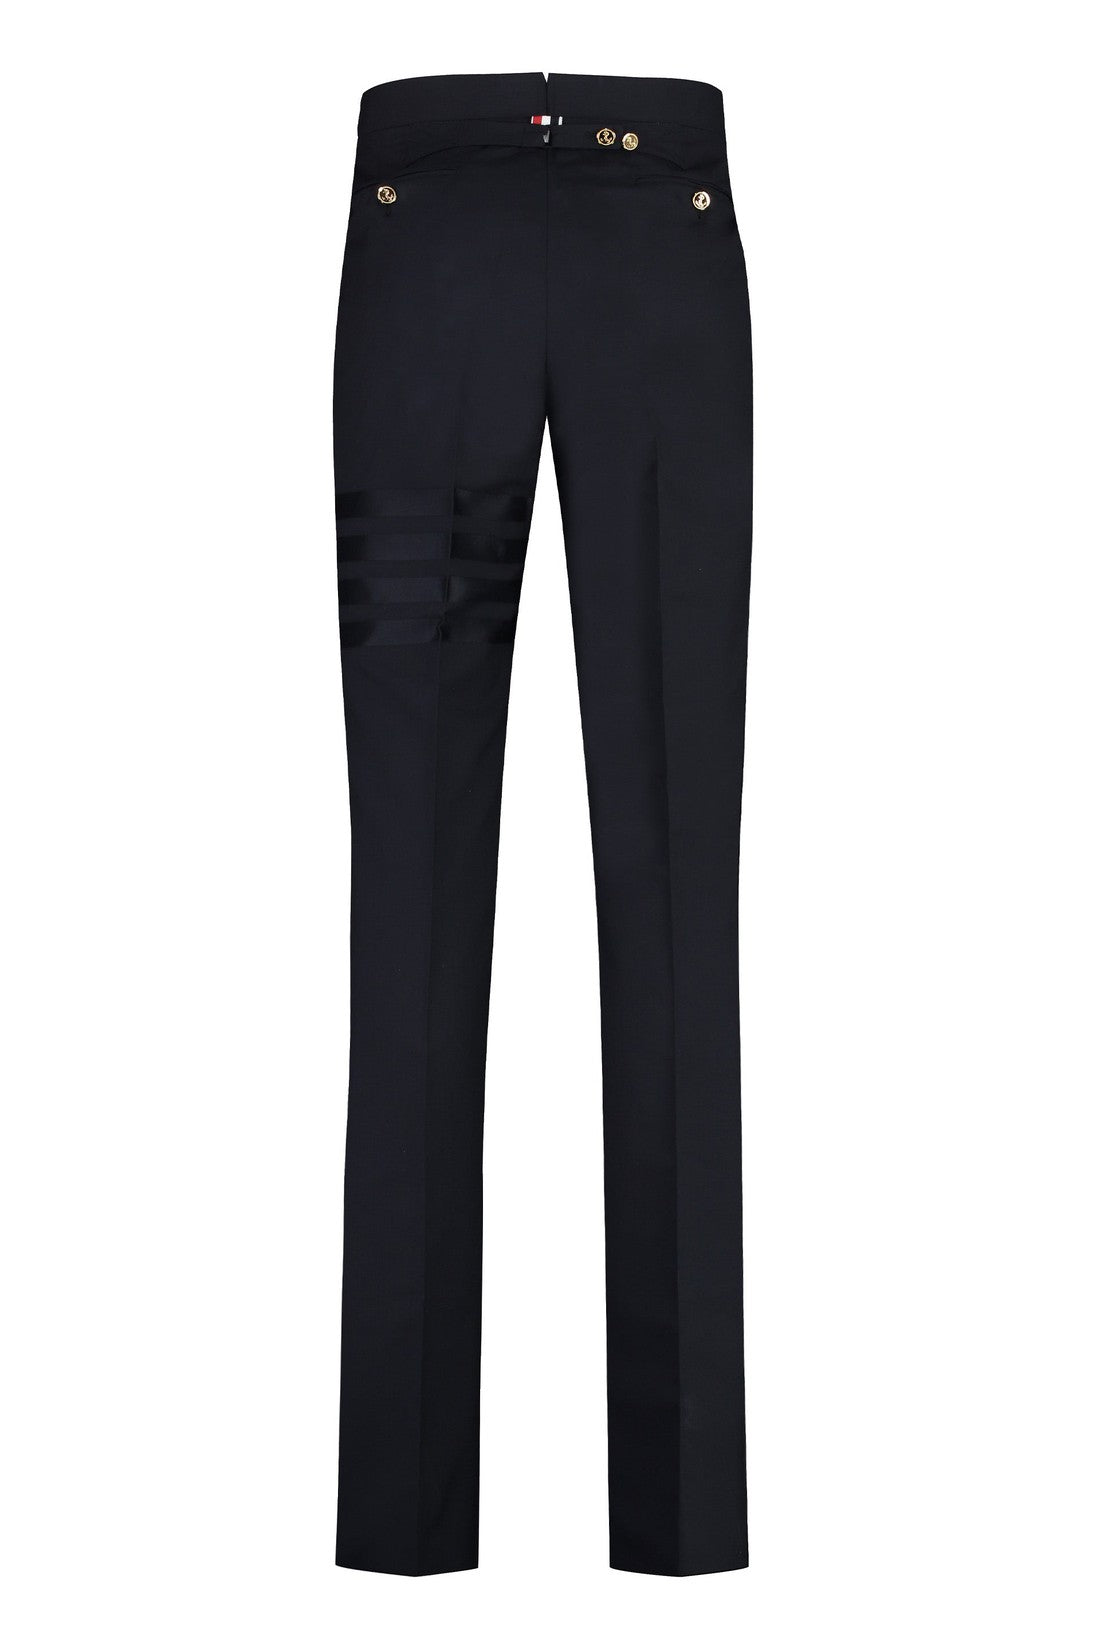 Thom Browne-OUTLET-SALE-Wool tailored trousers-ARCHIVIST